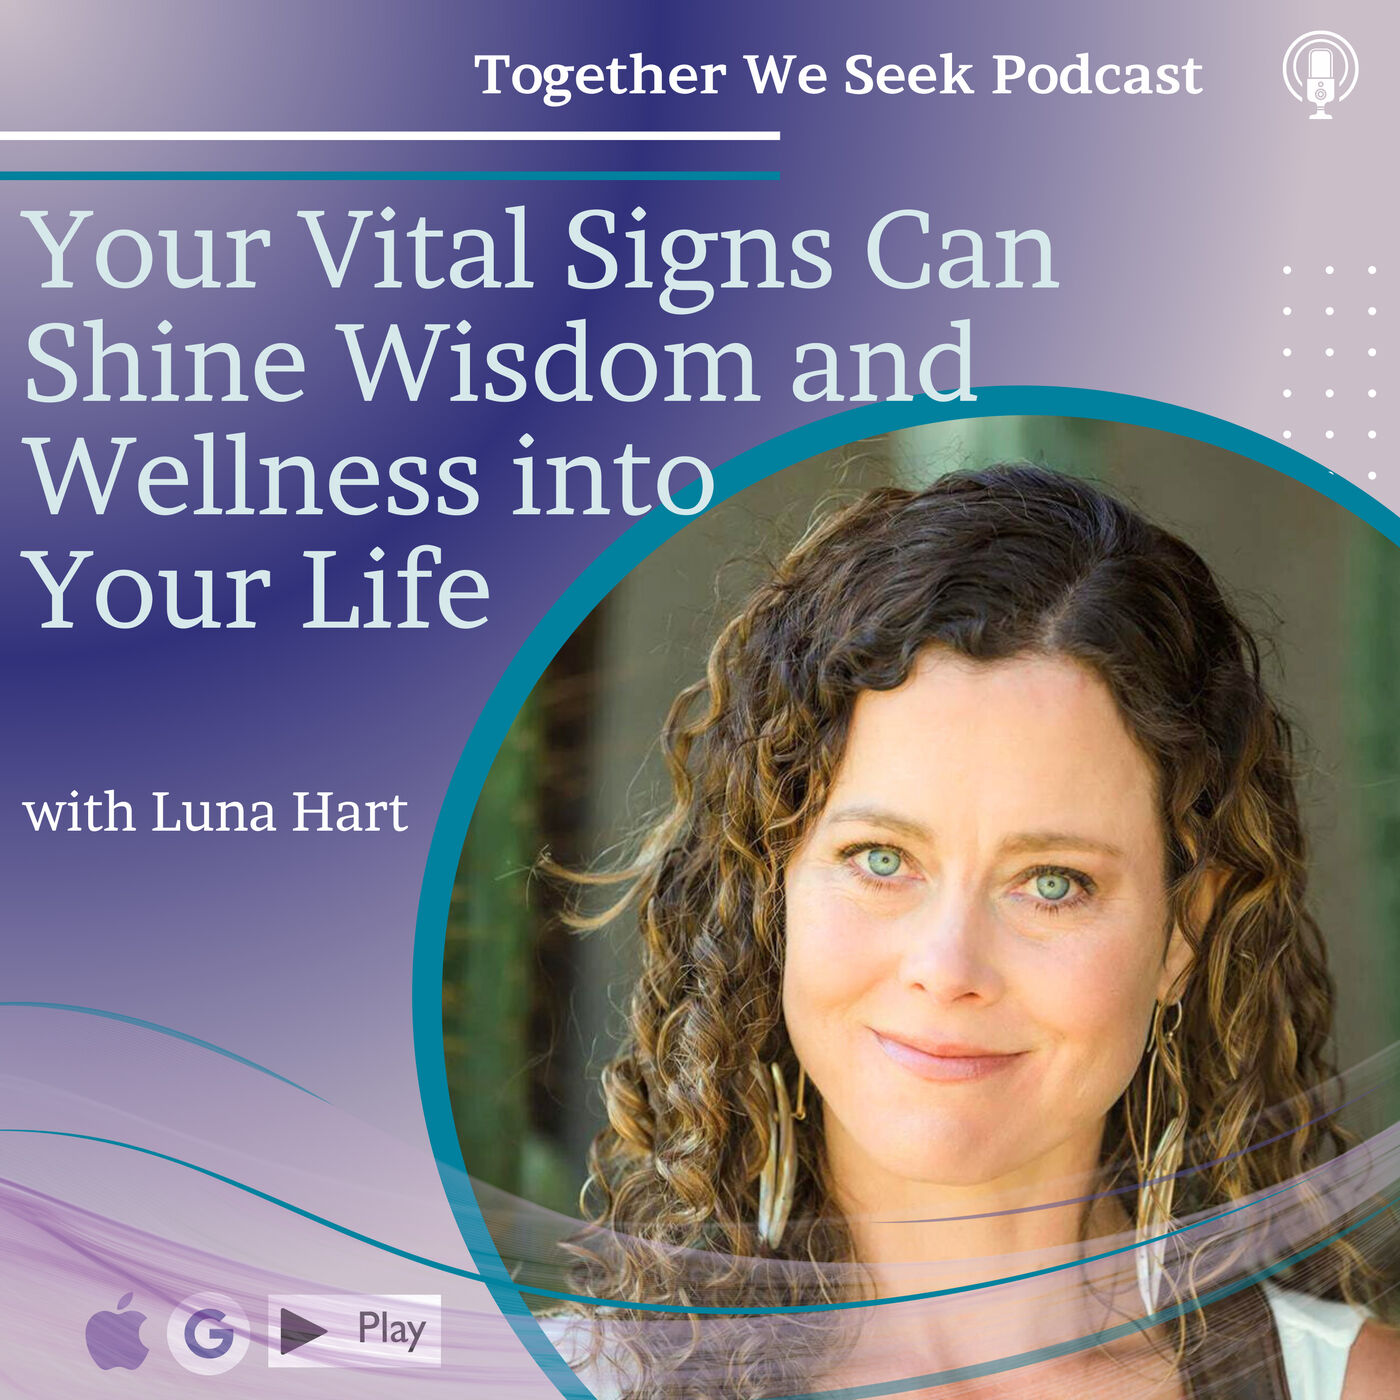 Your Vital Signs Can Shine Wisdom and Wellness into Your Life with Luna Hart